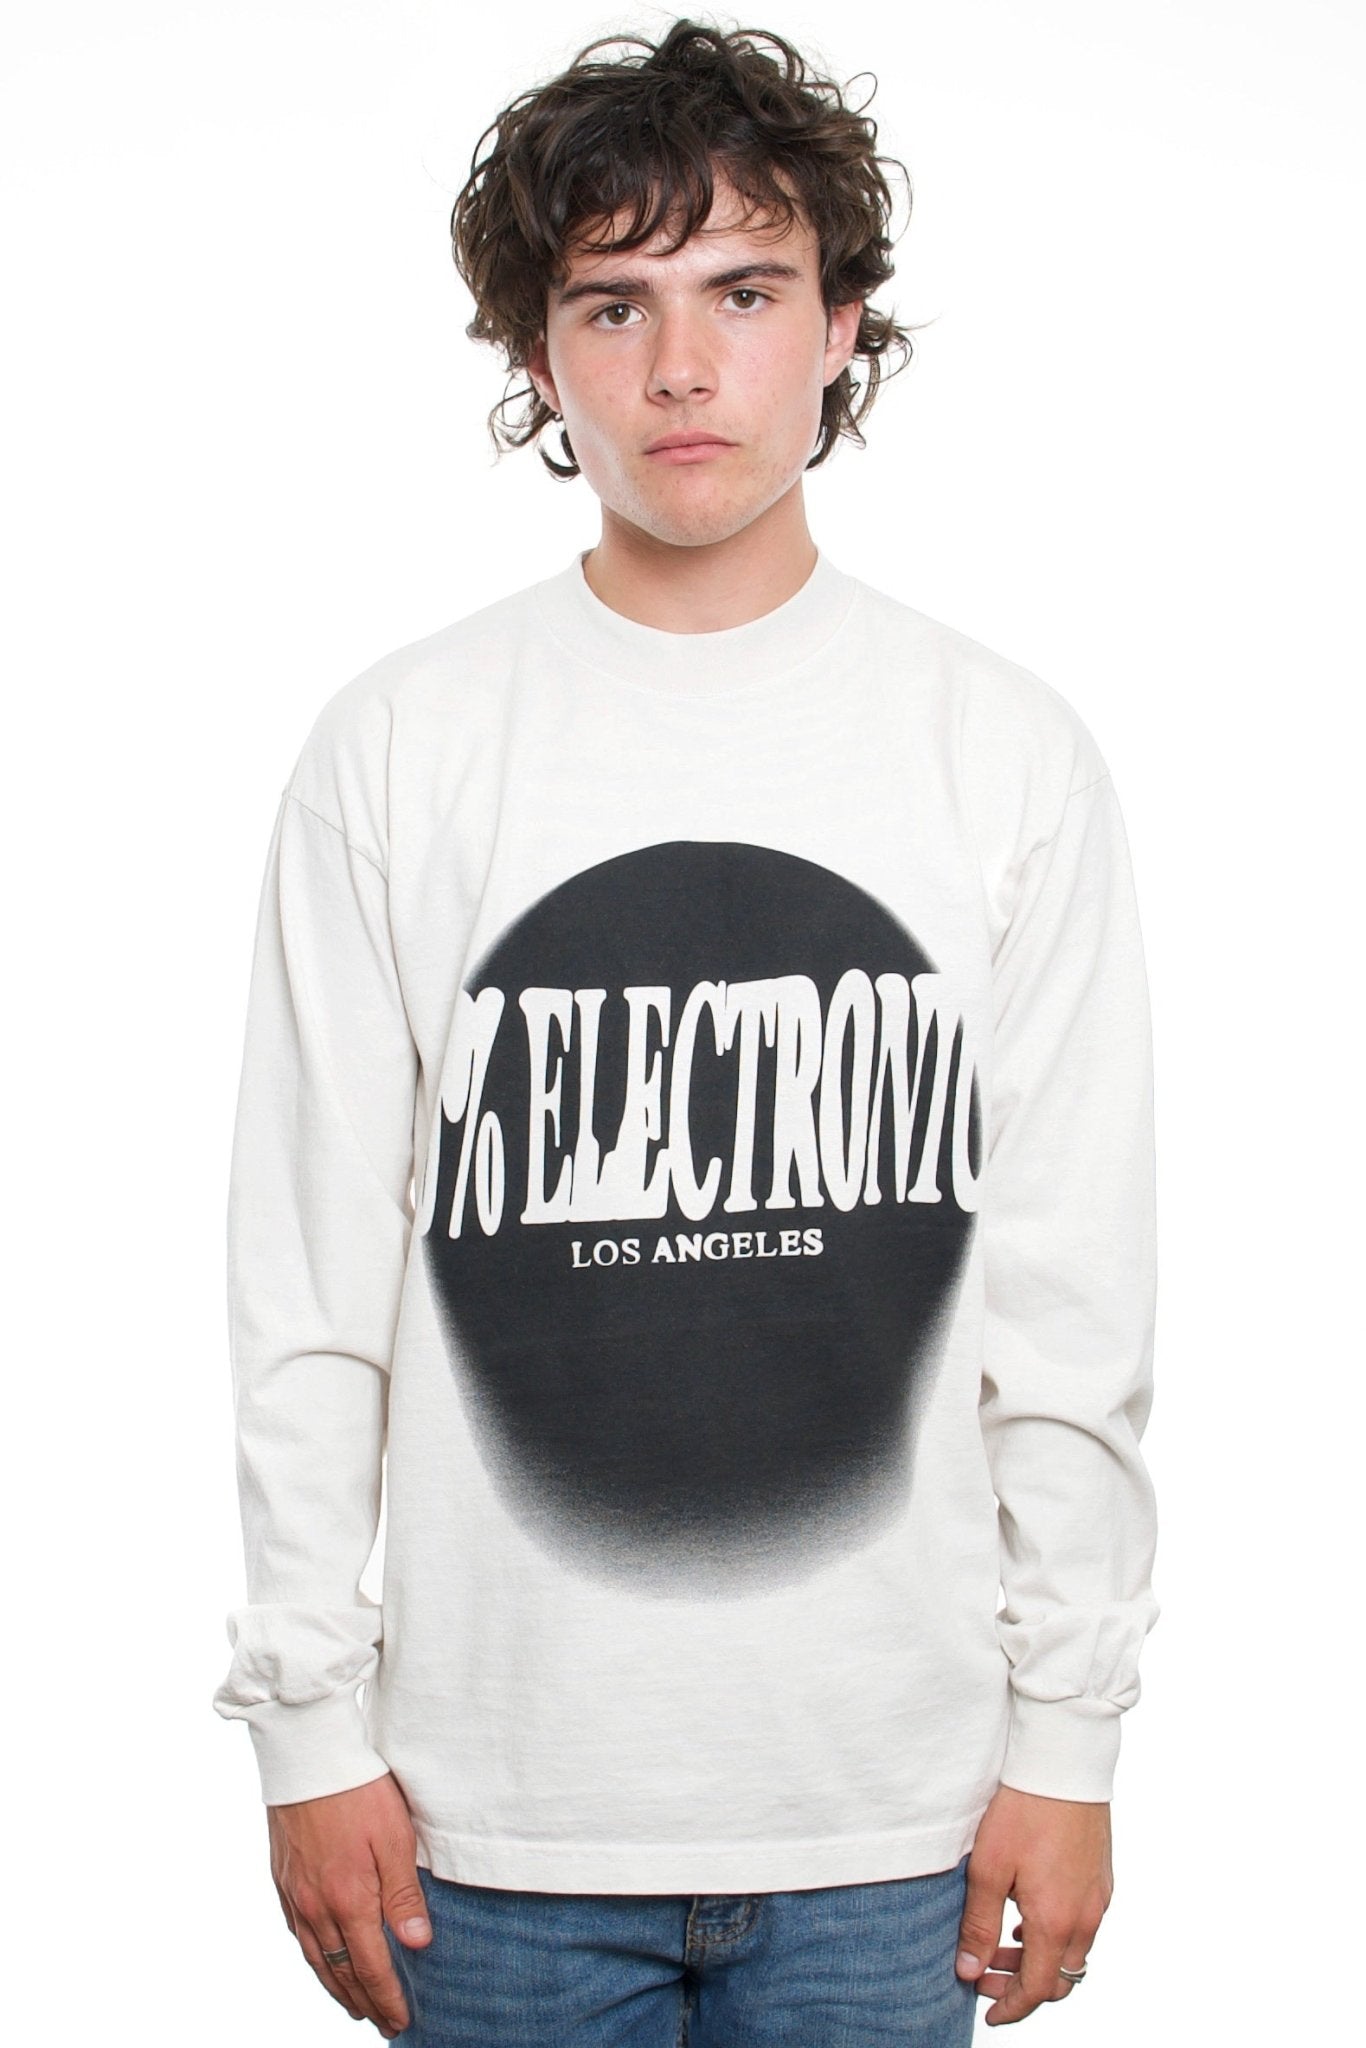 100% Electronica - Spotlight LS T-Shirt - Concrete - 100% Electronica Official Store (Photo 1)